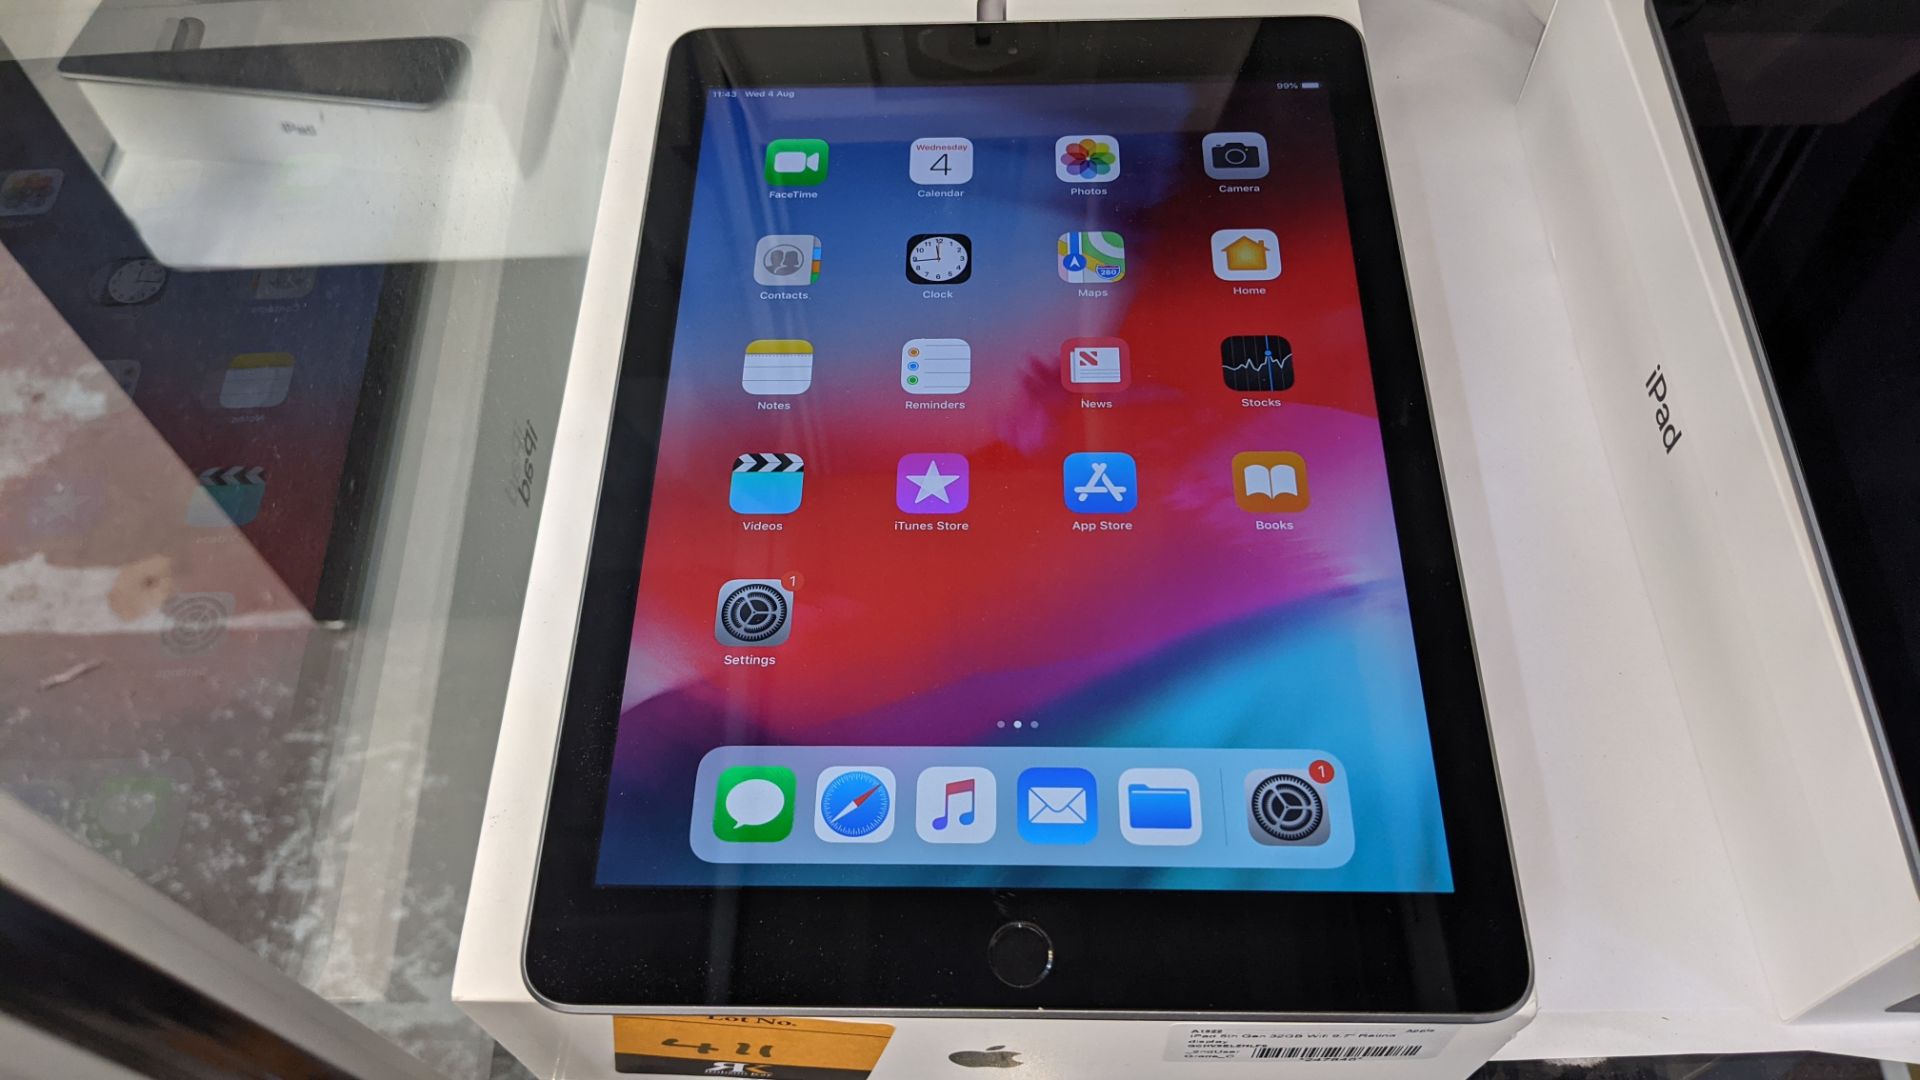 Apple iPad (space grey) 5th generation 32Gb Wi-Fi 9.7" Retina screen. Product code A1822. Apple A9 - Image 5 of 10